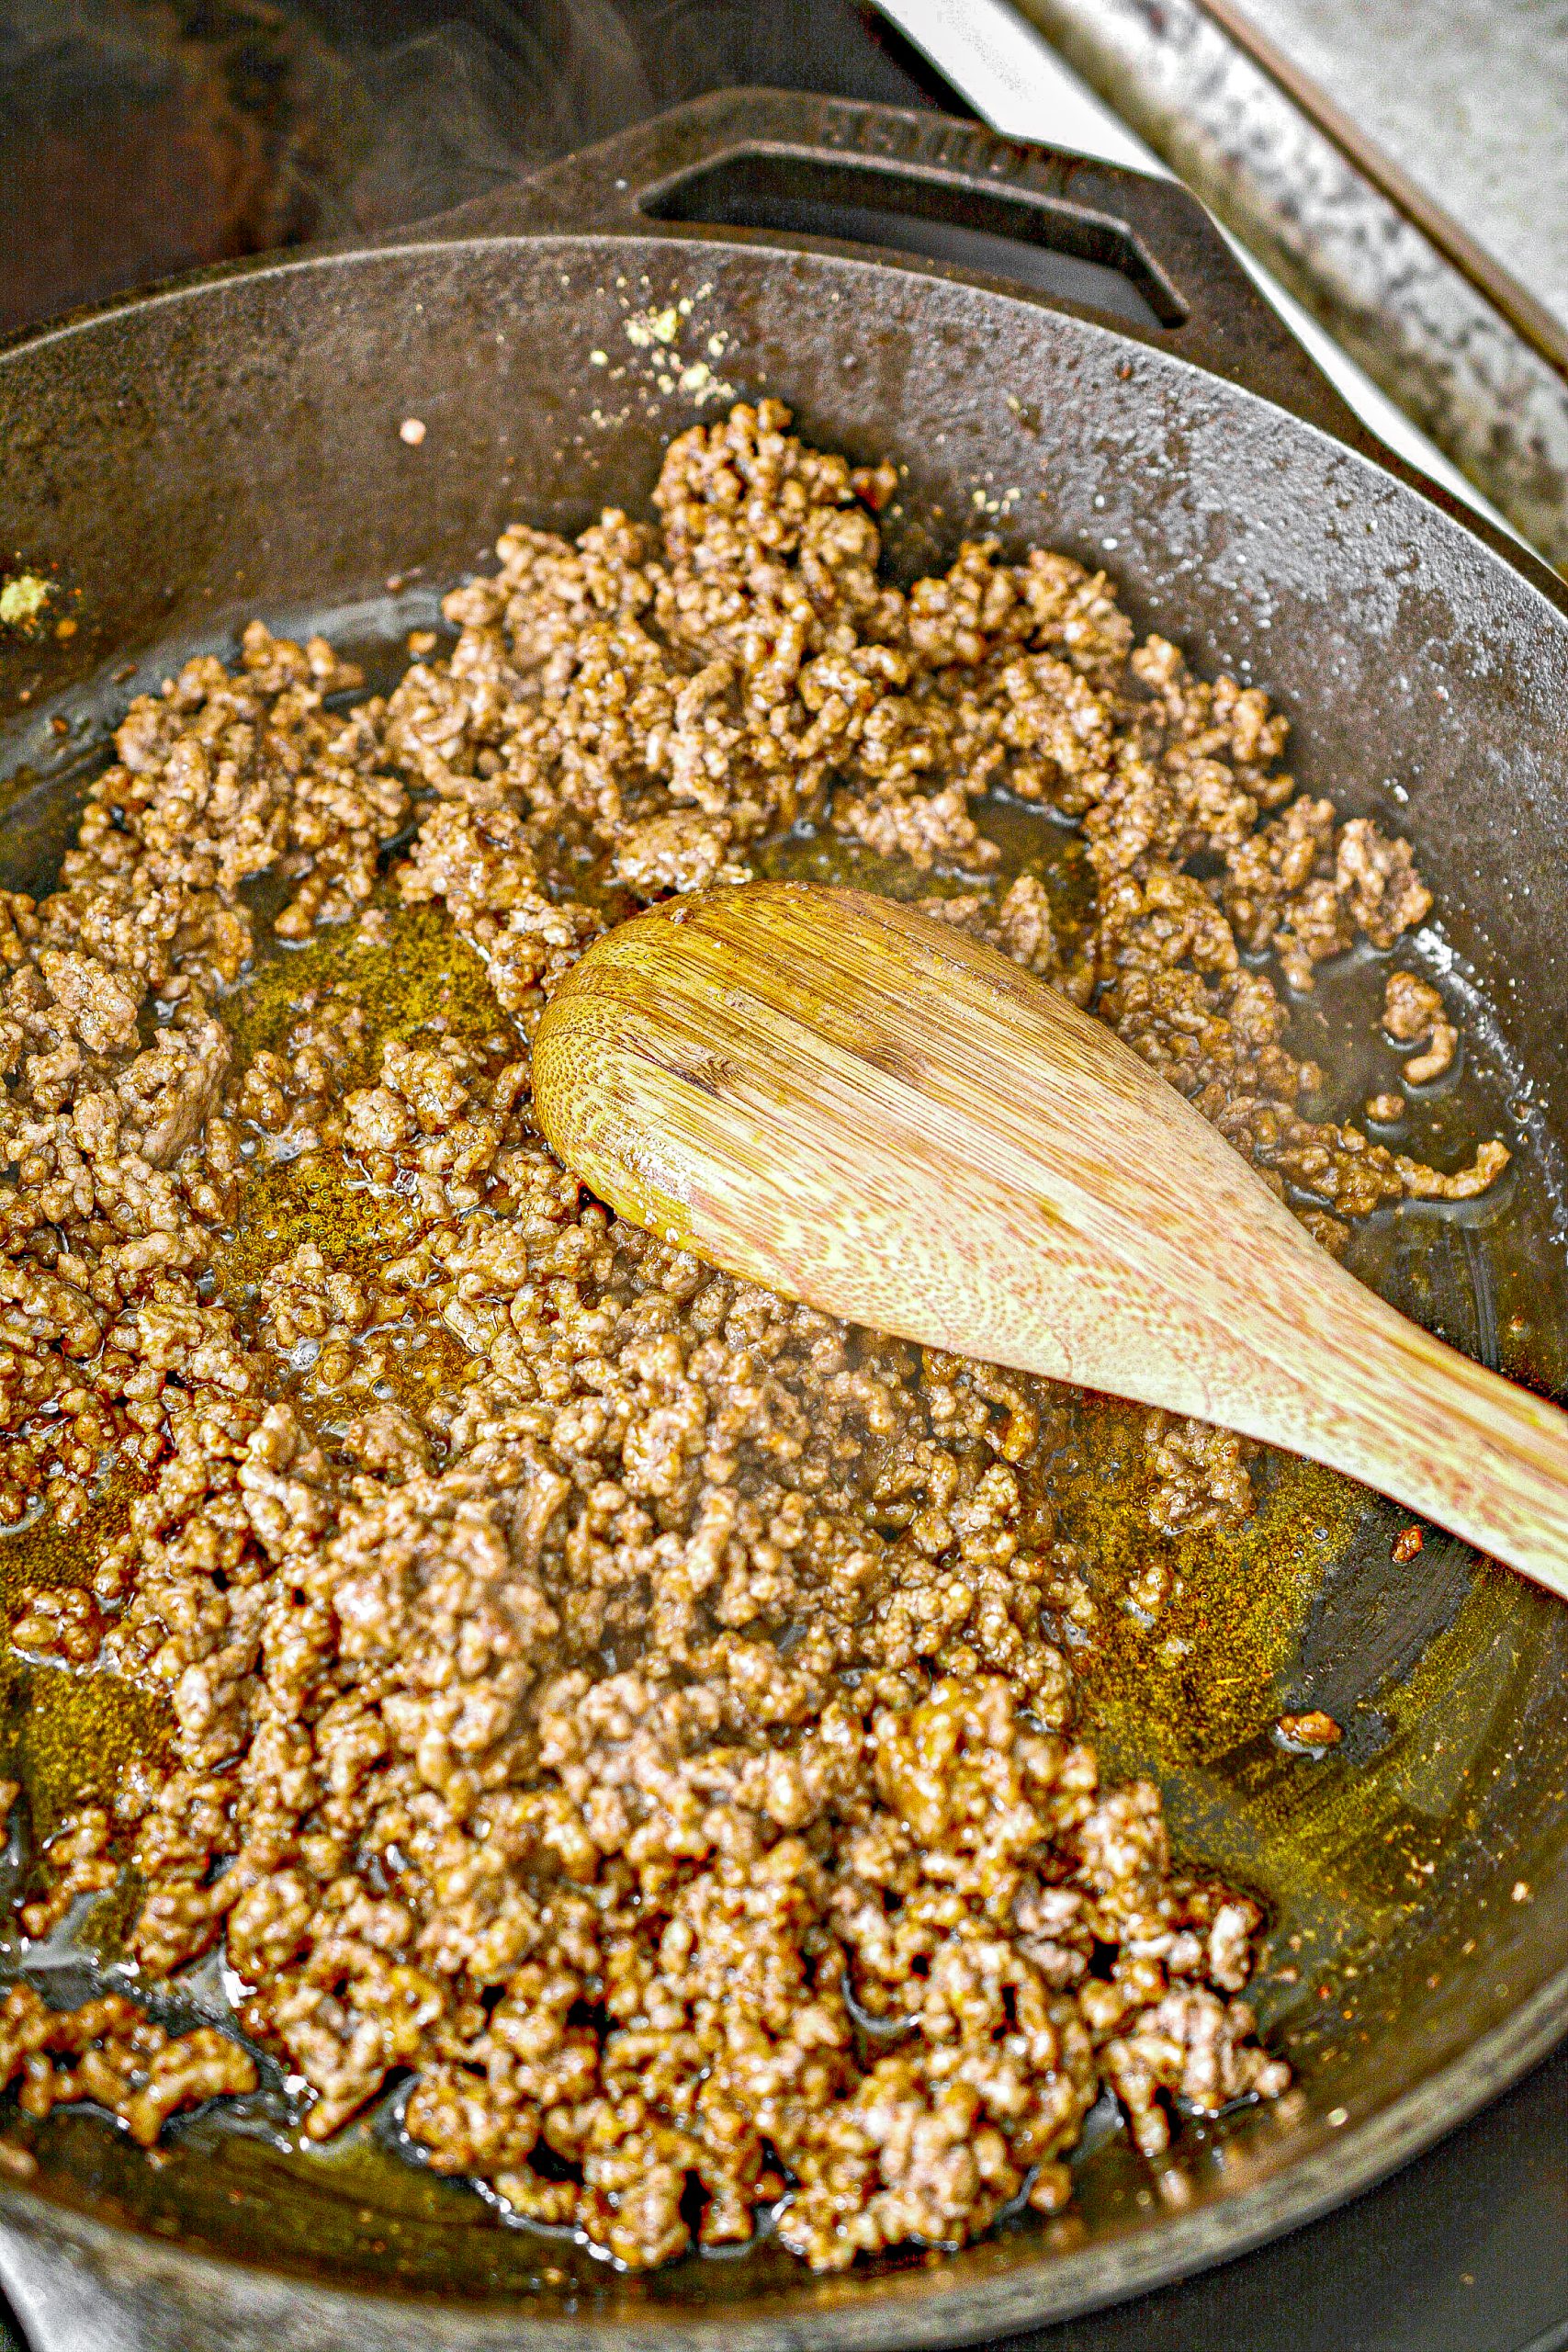 Cook the ground beef in a skillet over medium-high heat until it is completely browned.